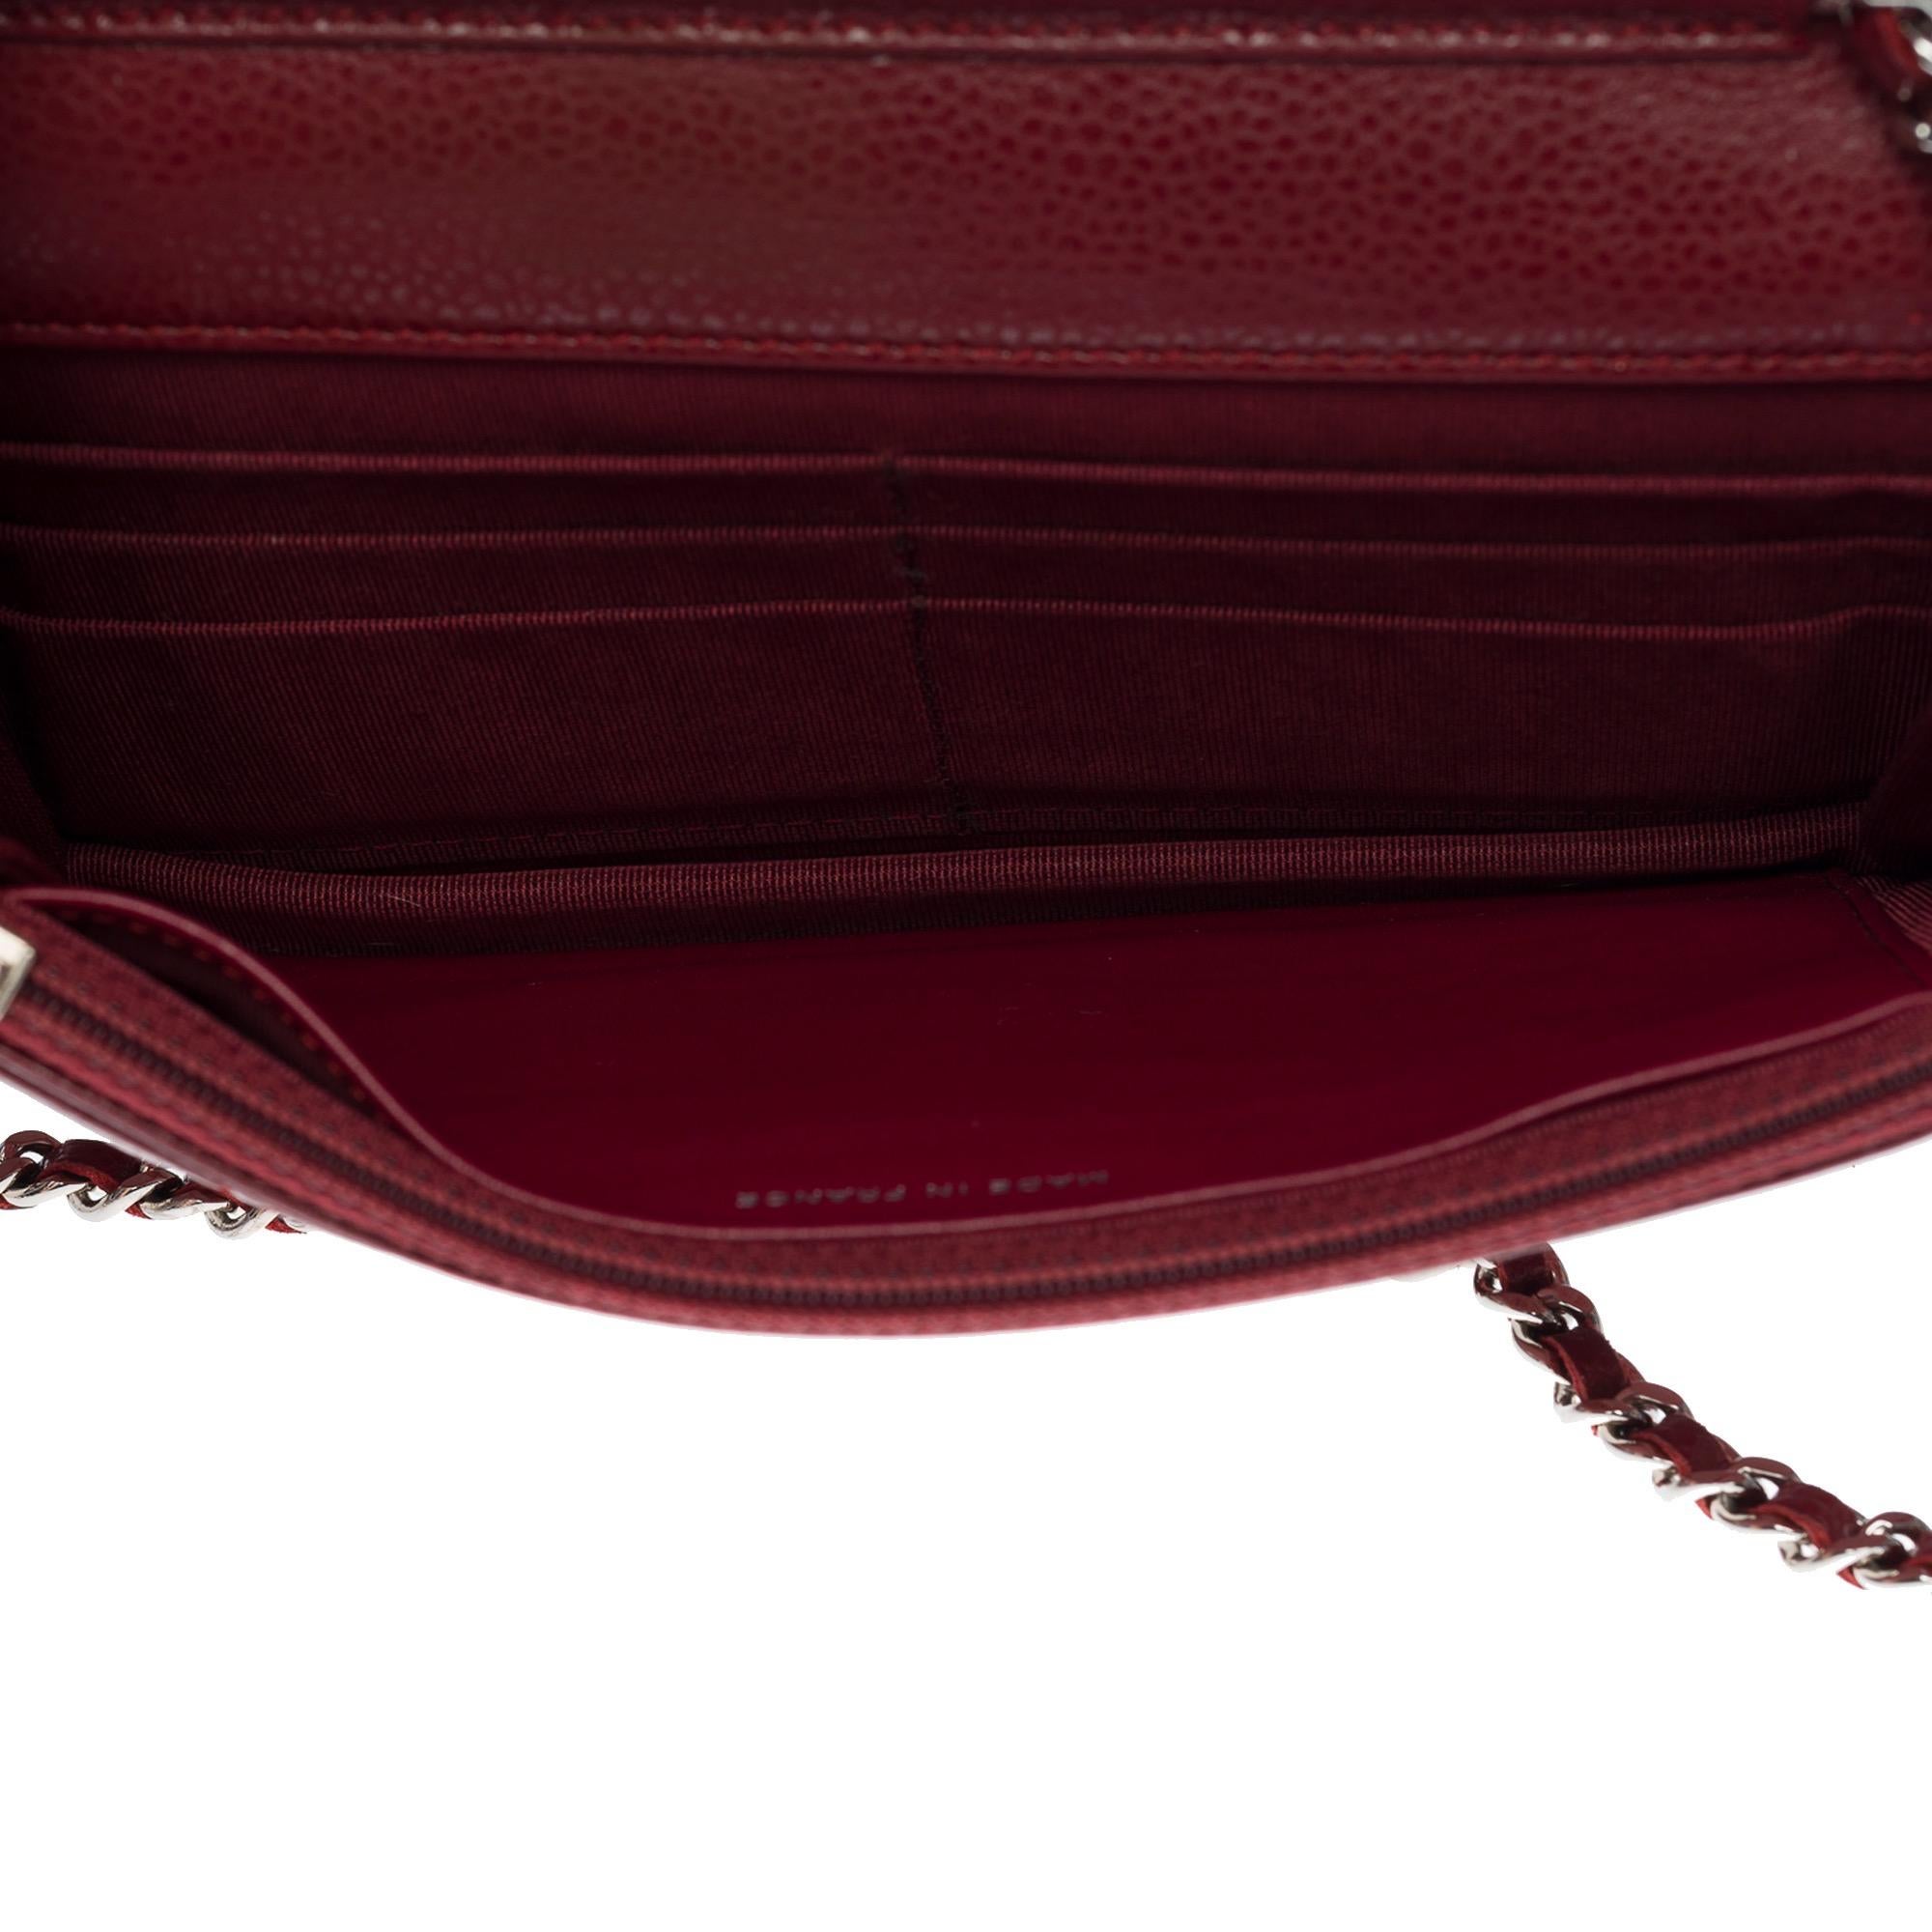 Chanel Wallet On Chain handbag in burgundy quilted caviar leather, SHW 4